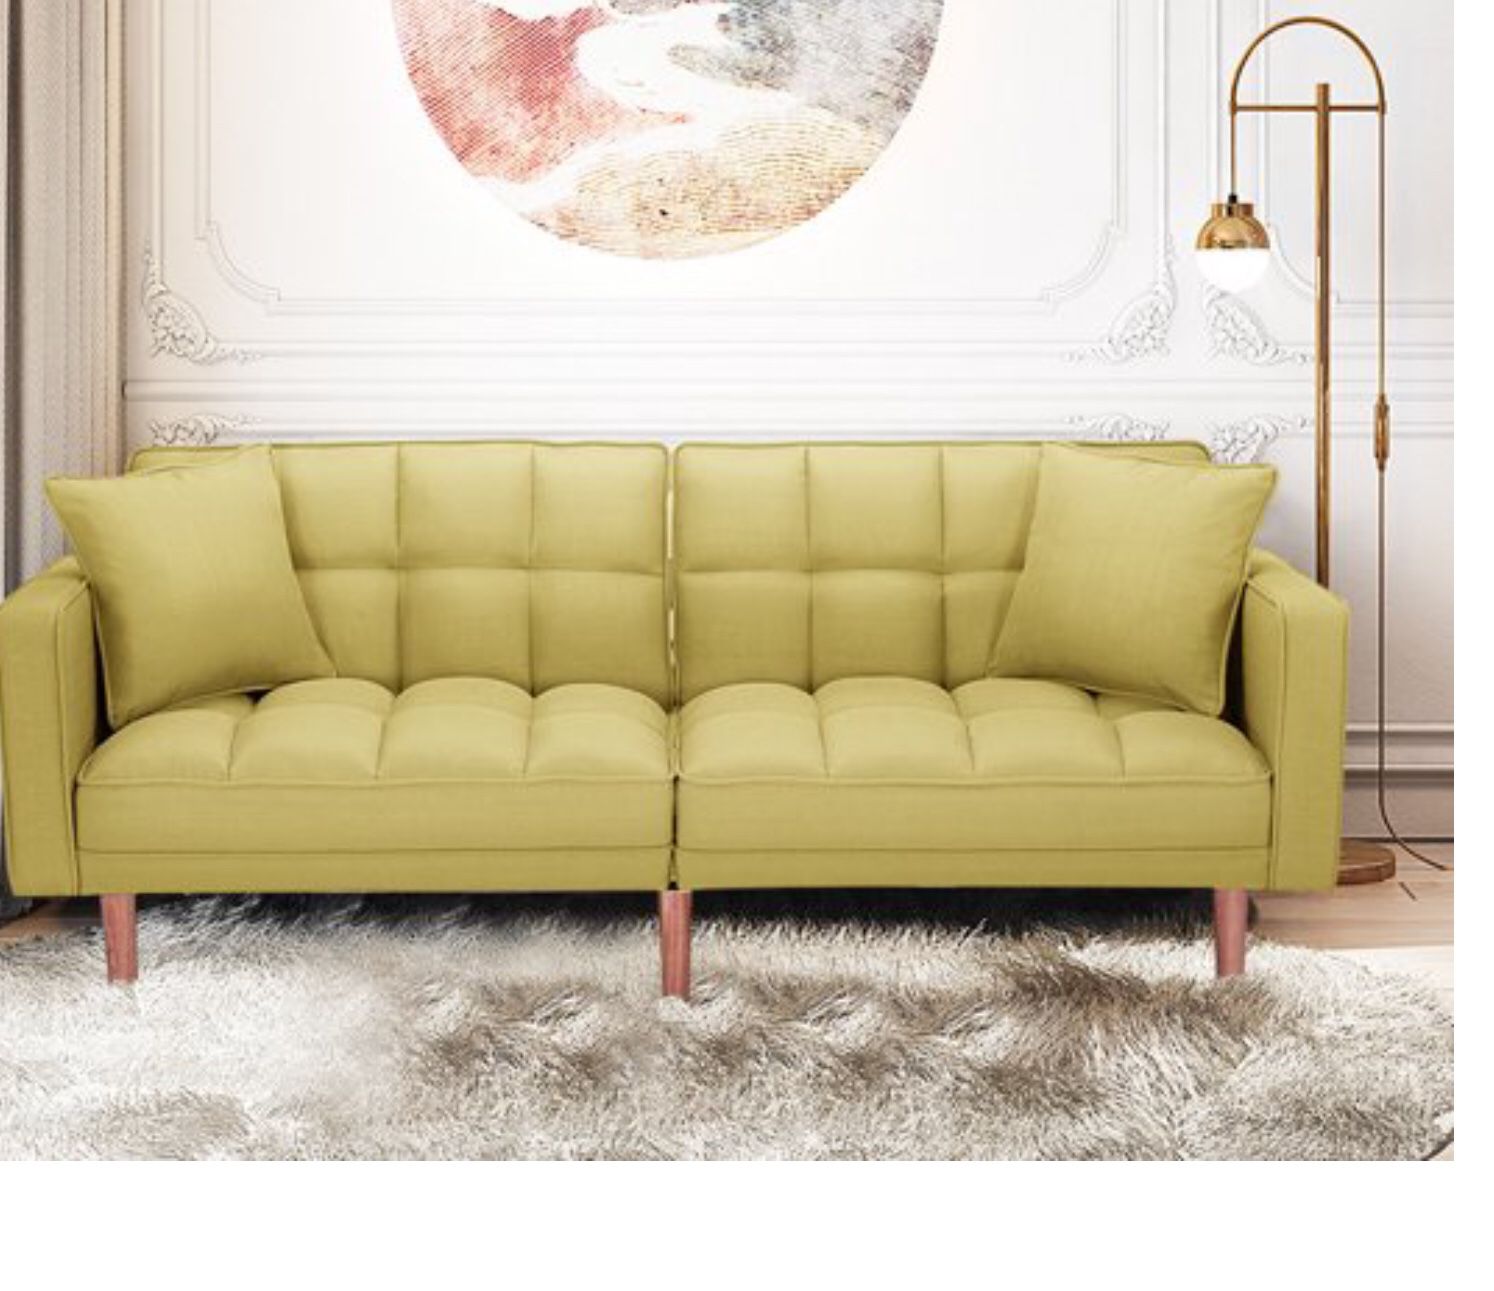 Sofa, Sofa Bed, Couch, Futon, Yellow, Faux Leather W Wood Base